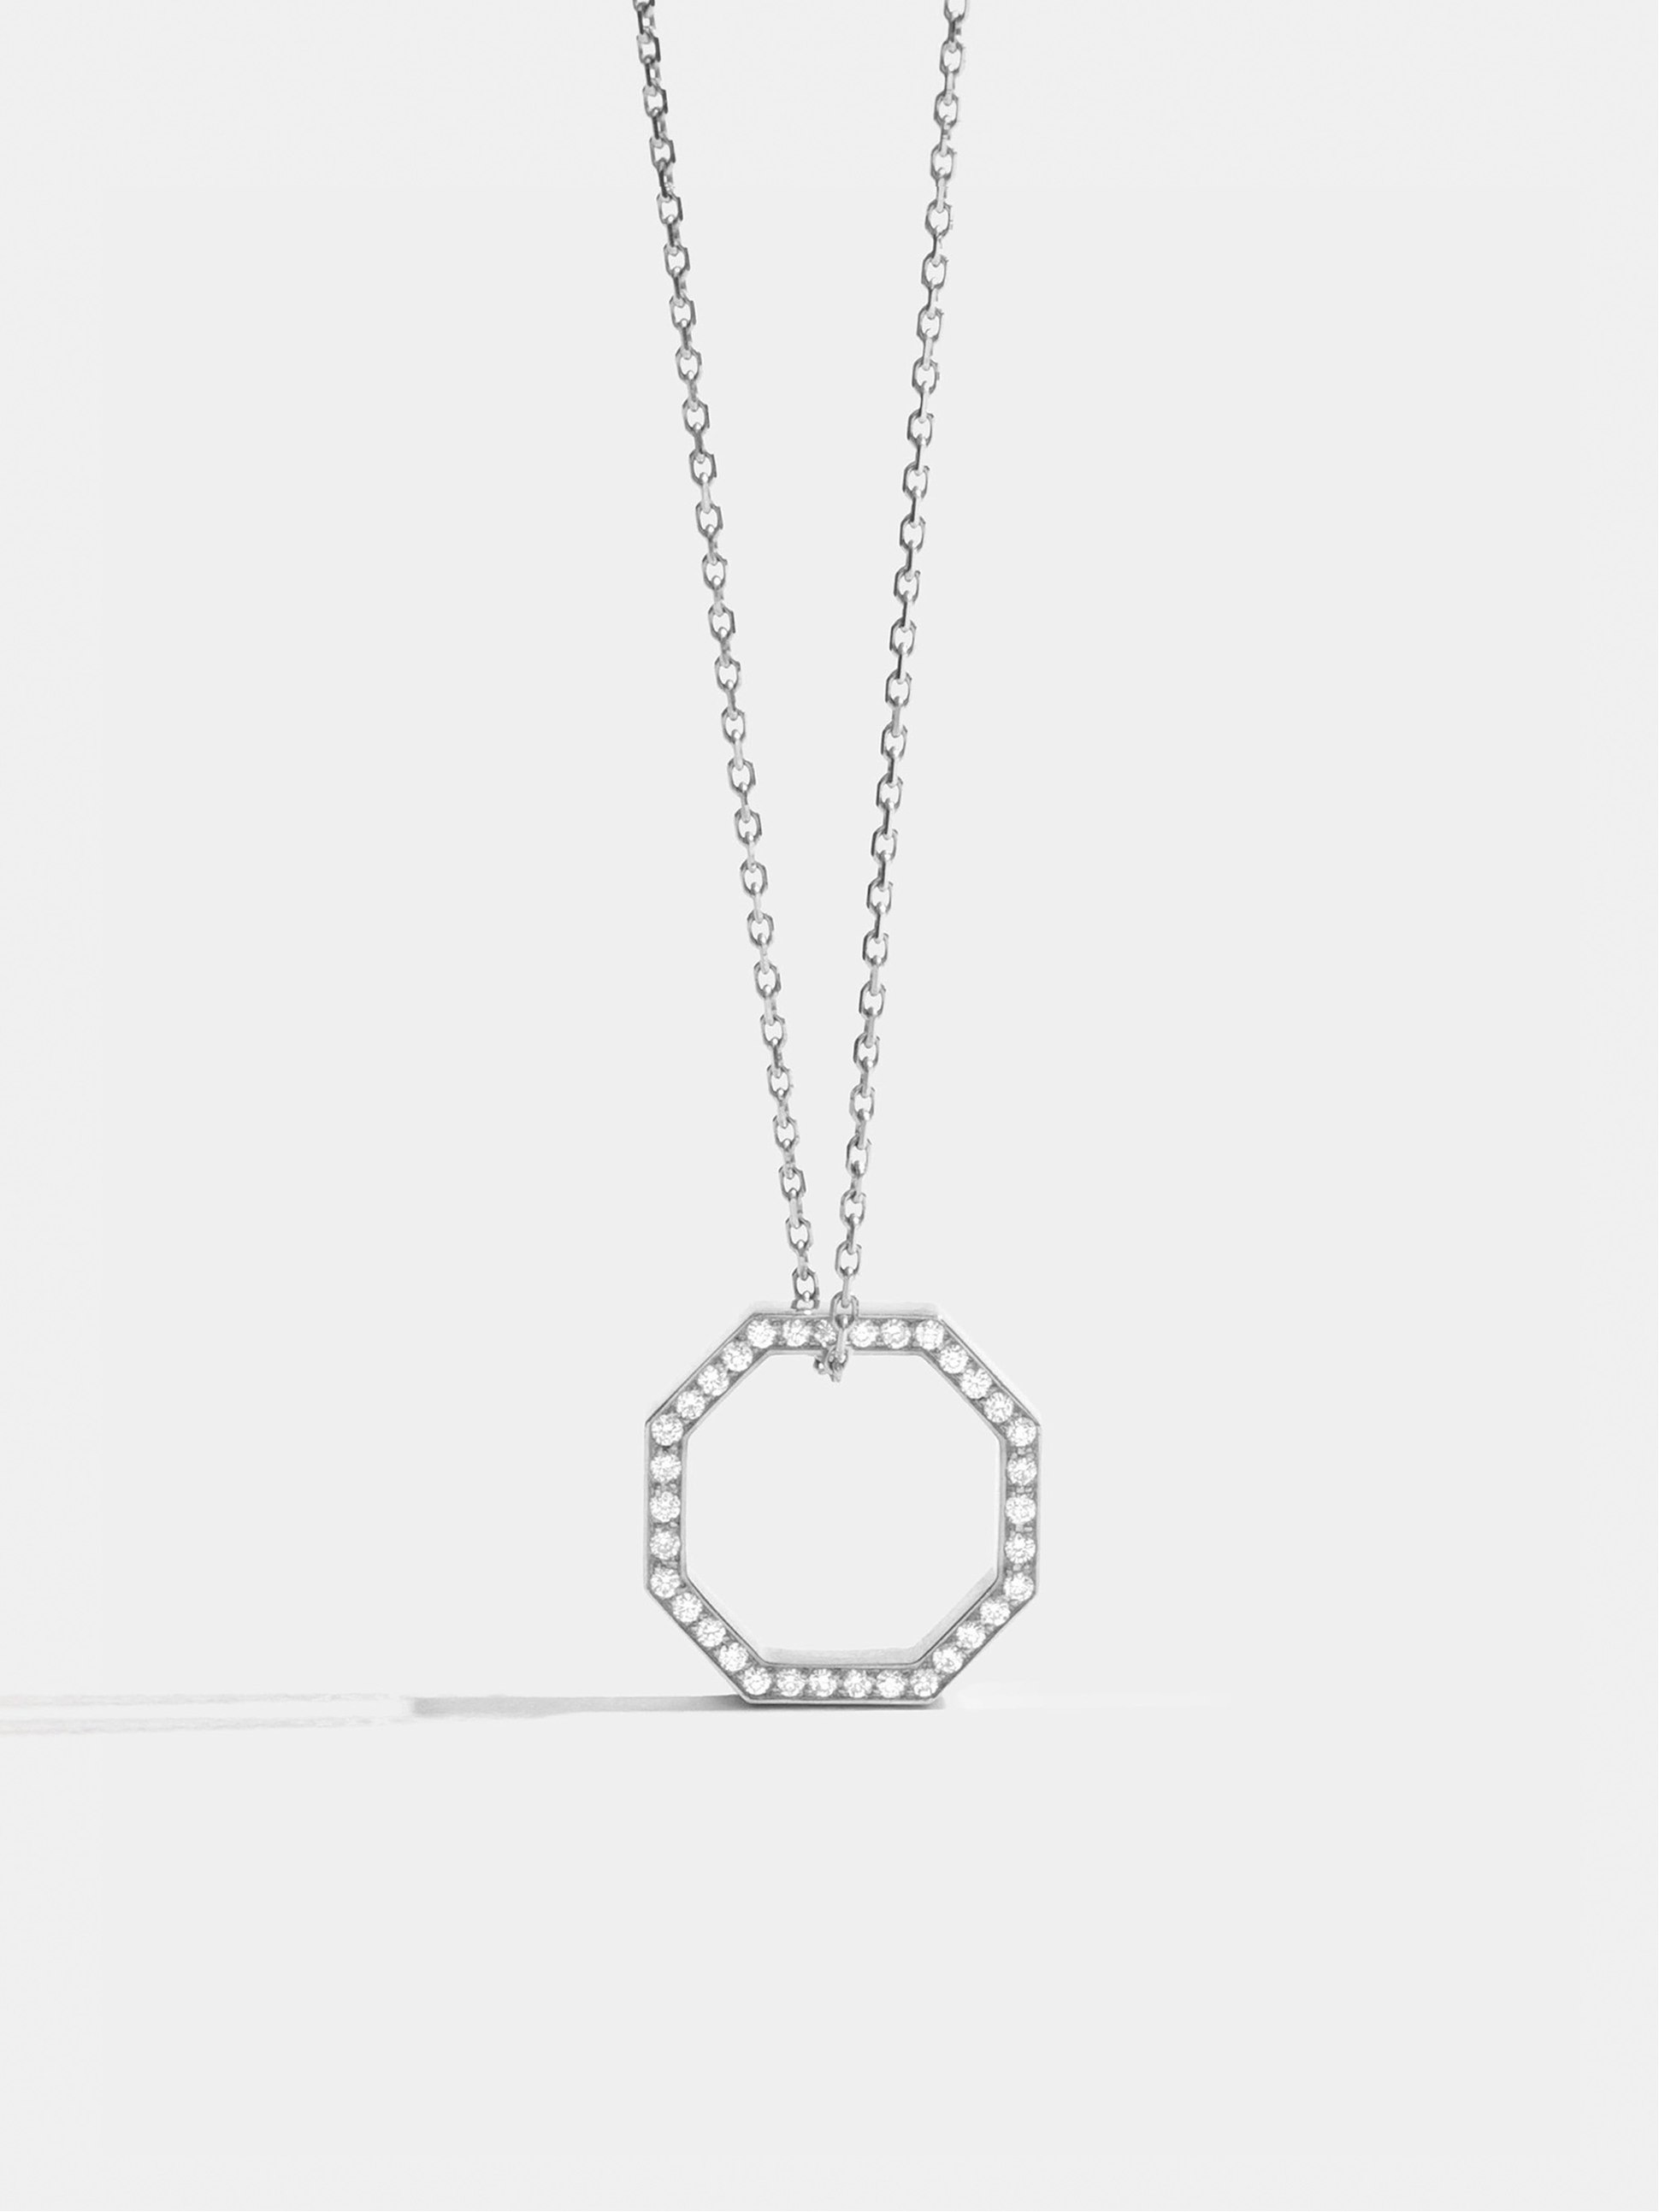 Octogone 14mm pendant in 18k Fairmined ethical white gold, paved with lab-grown diamonds, on a chain.